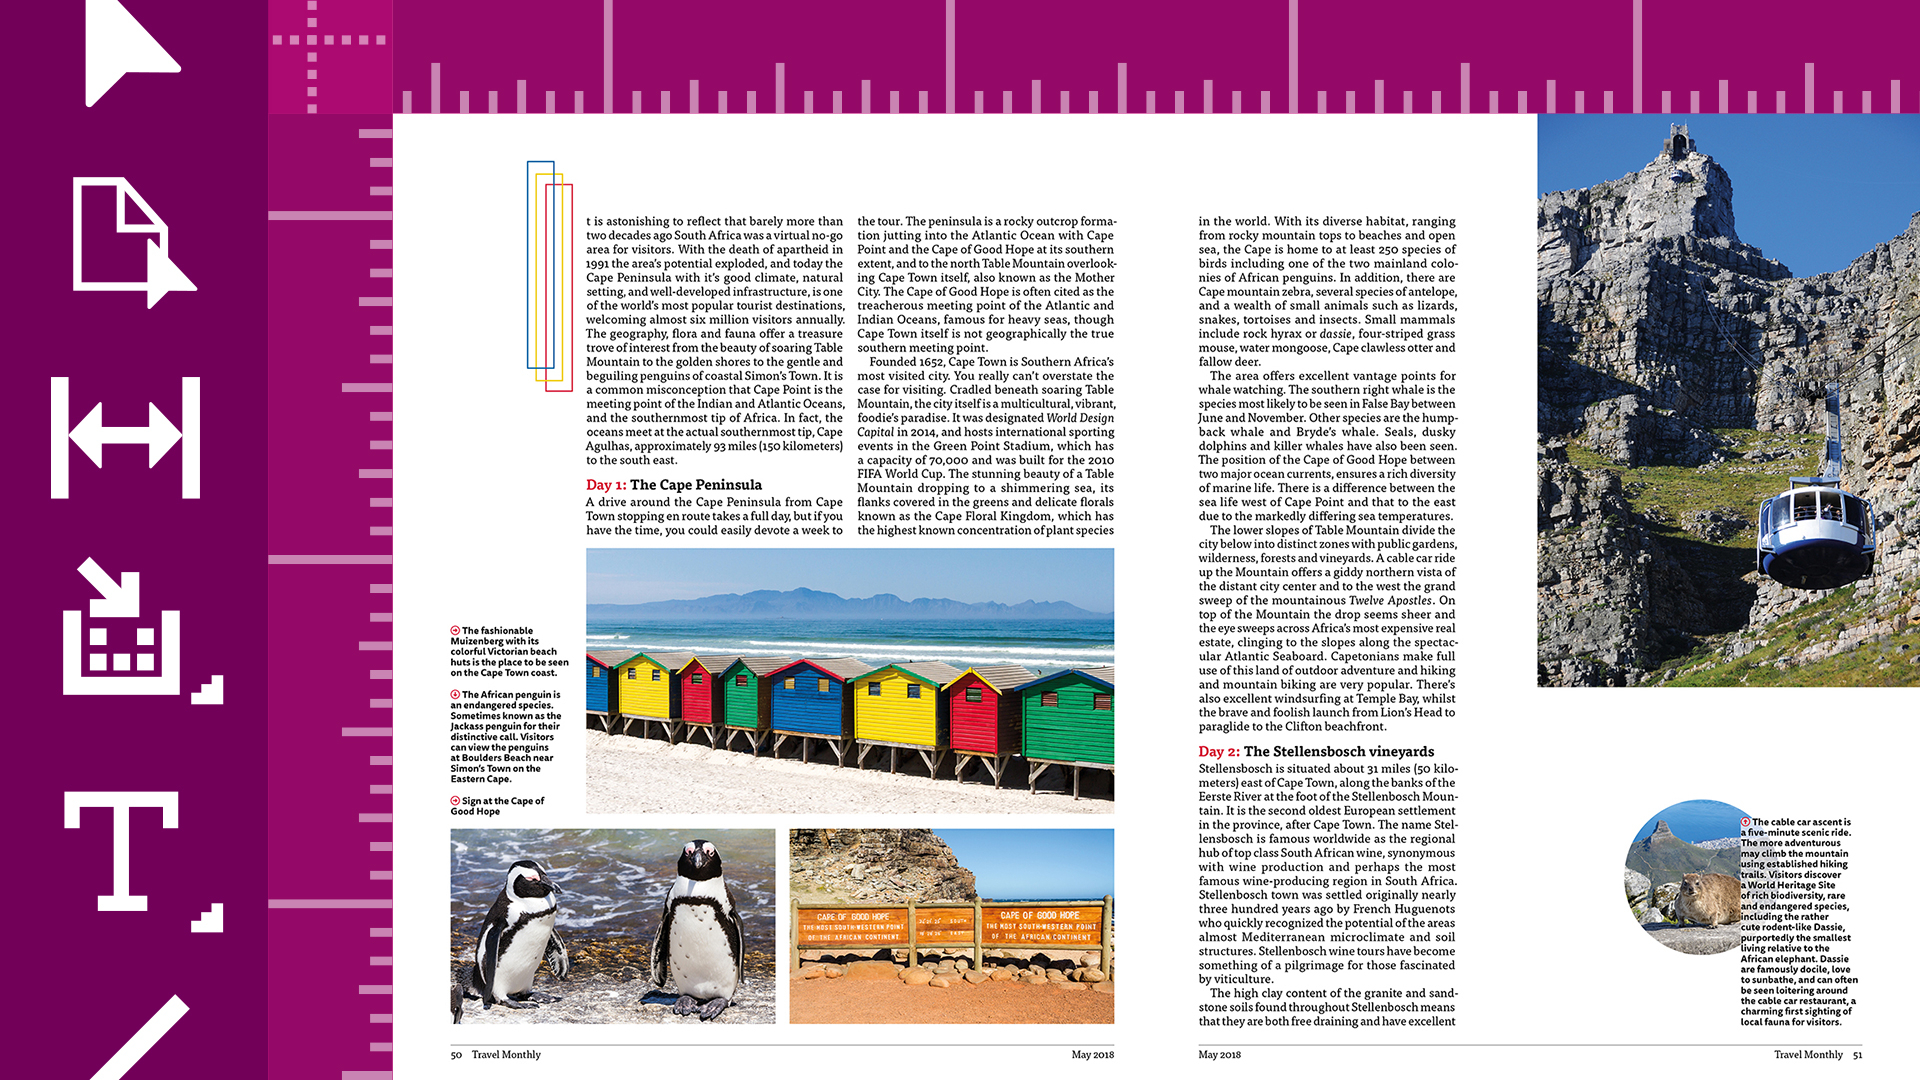 Indesign Cc: Designing A Magazine Layout Intended For Magazine Template For Microsoft Word